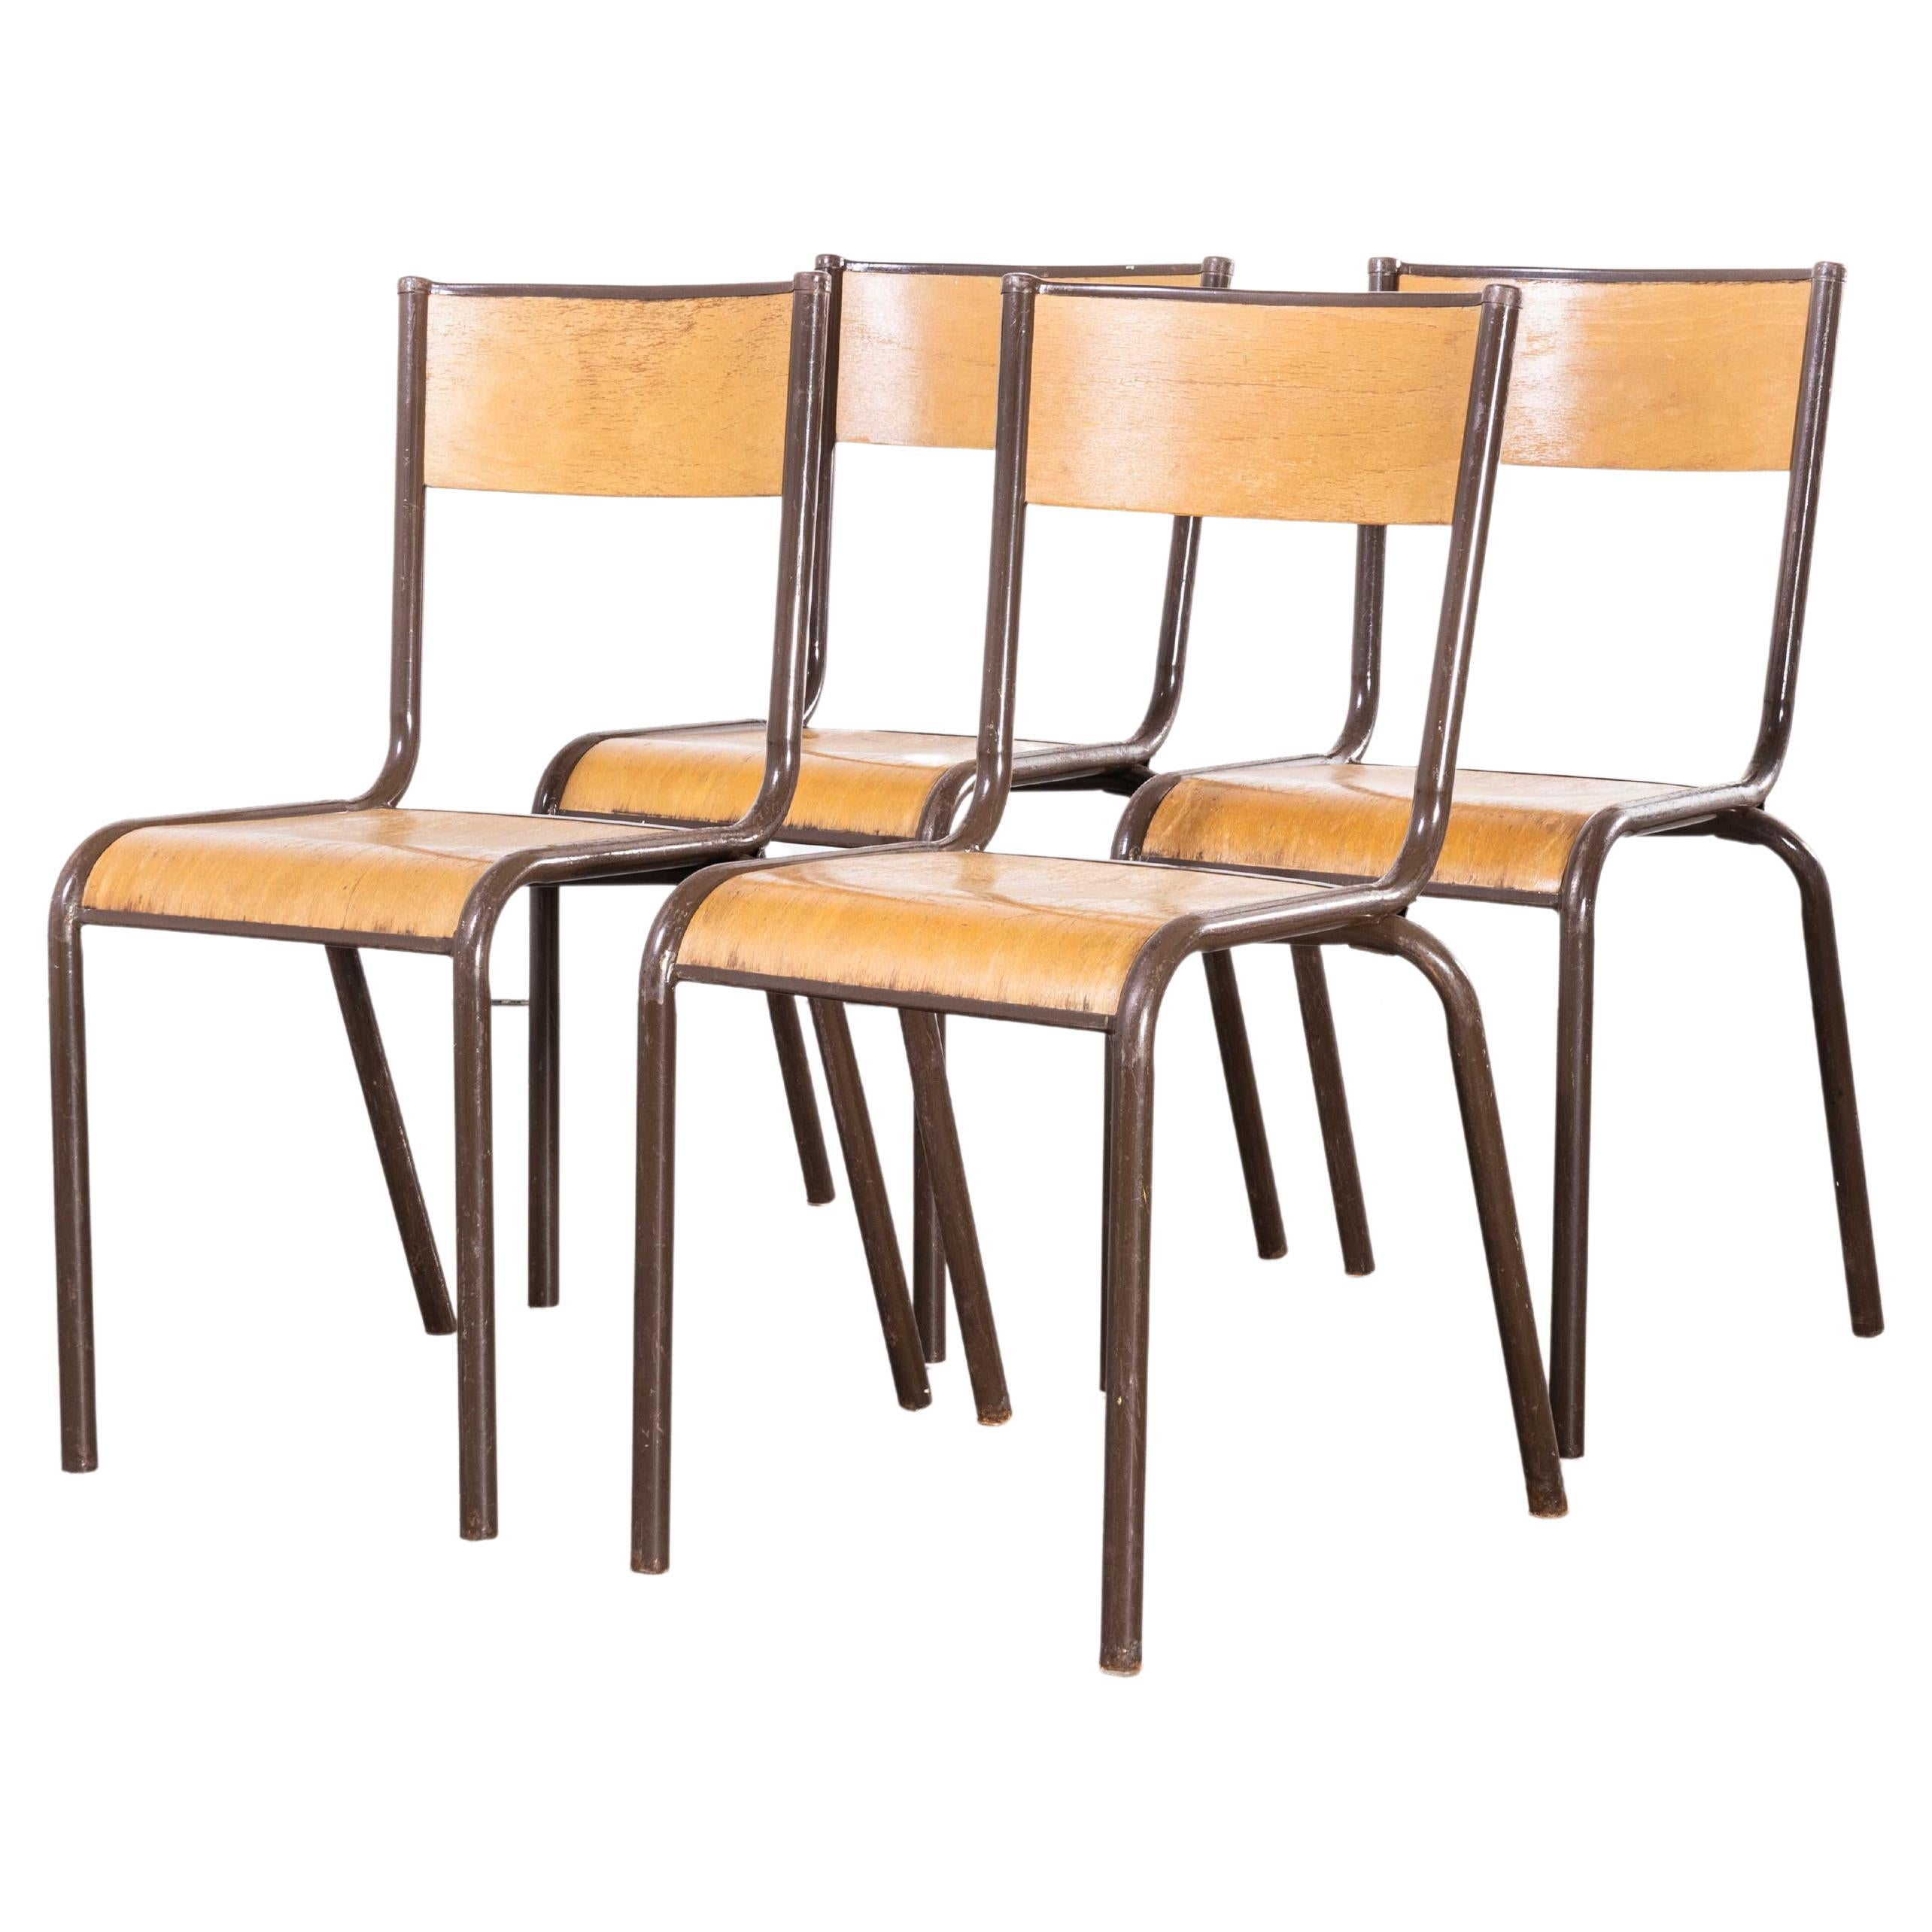 1950's French Mullca Dining Chairs Model 510, Chocolate, Set of Four